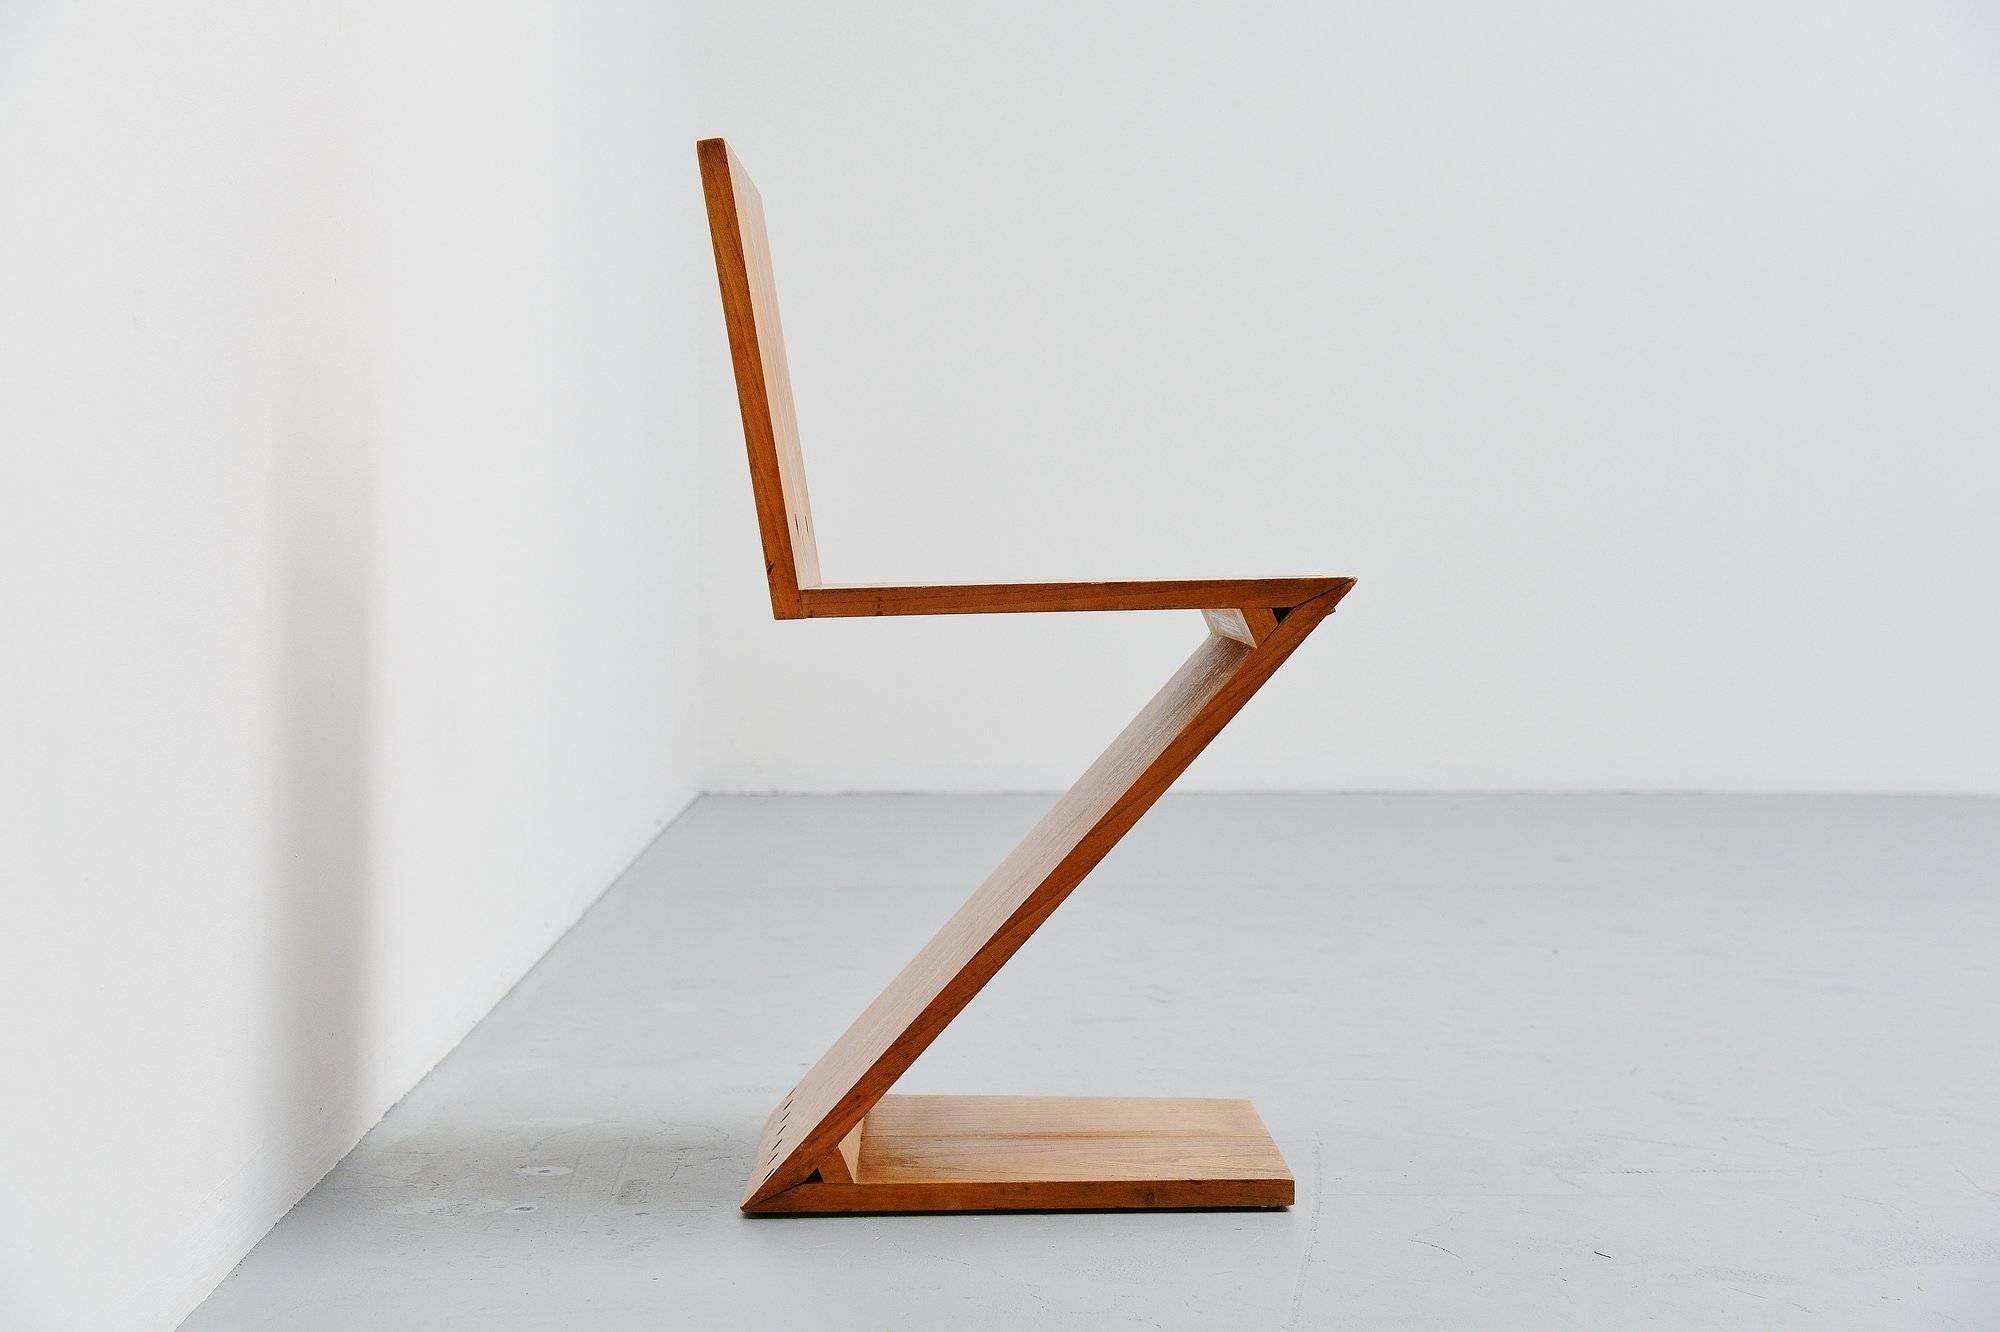 Design iconic chair of all design chairs, this rare and worldwide known Zig Zag chair designed by one of the most important architects and designers Holland has ever known. The zig zag chair was originally designed in 1934 but was produced and made